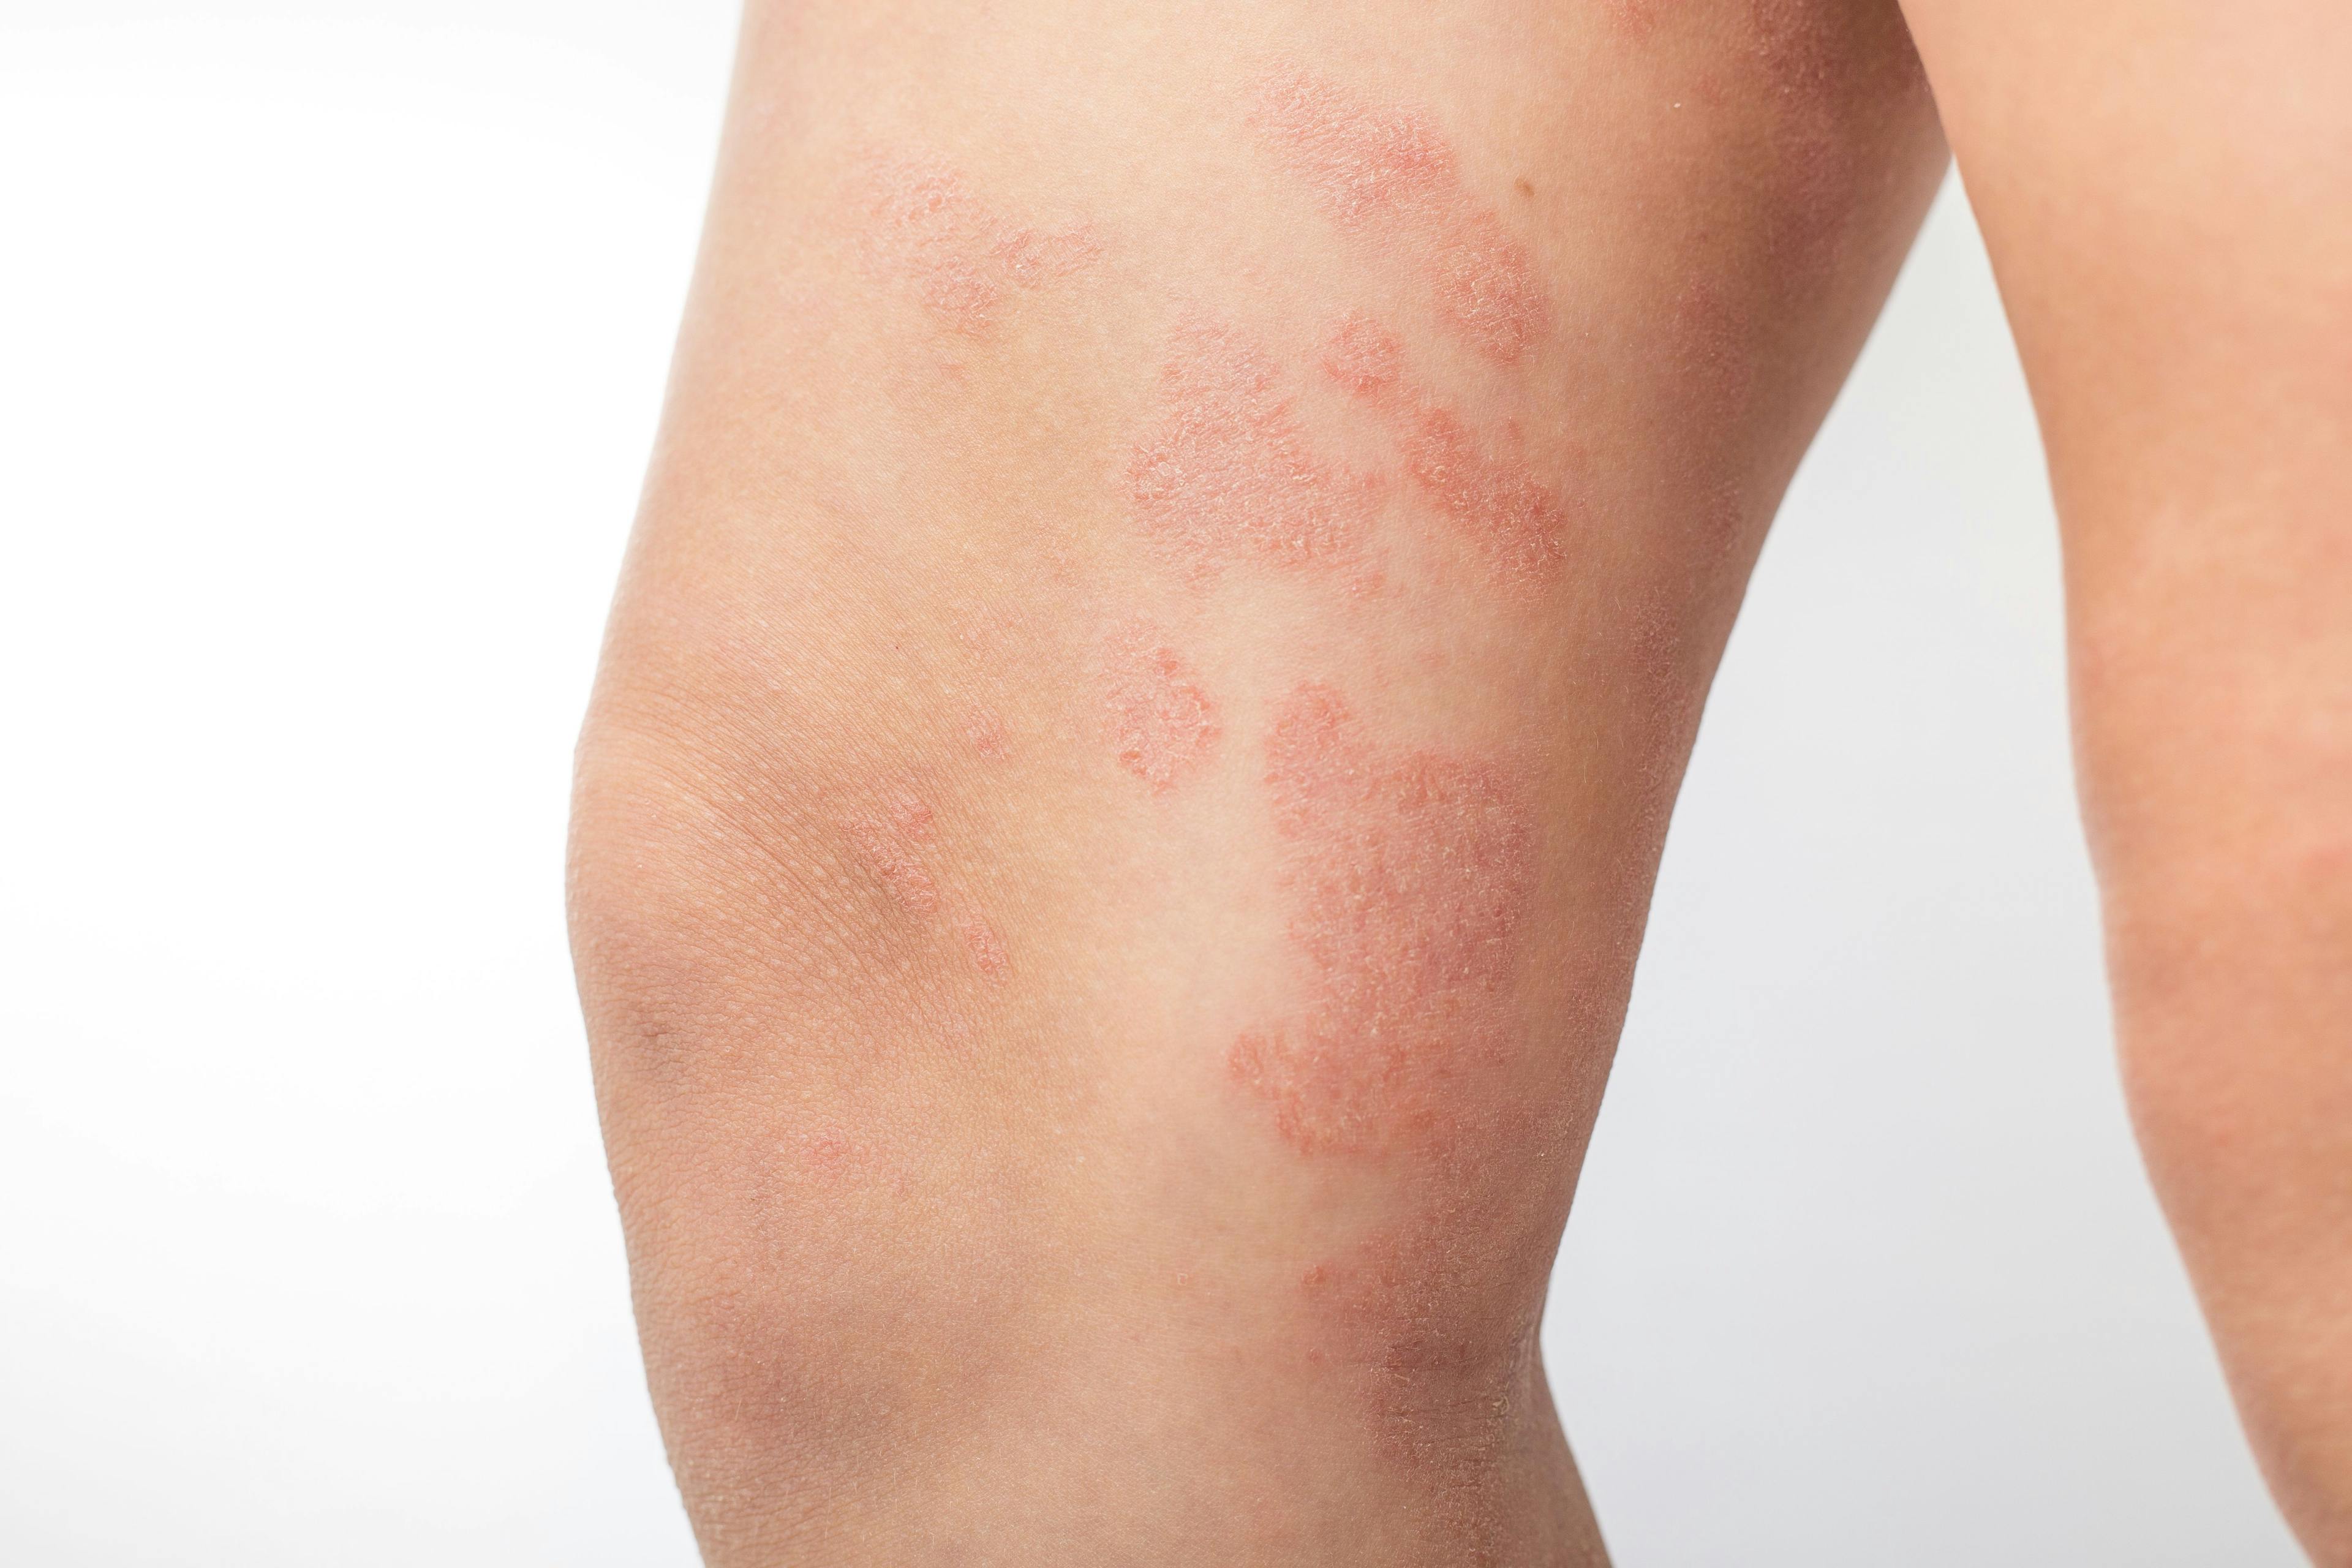 Antimicrobial Peptides Show Promise in Management of Atopic Dermatitis